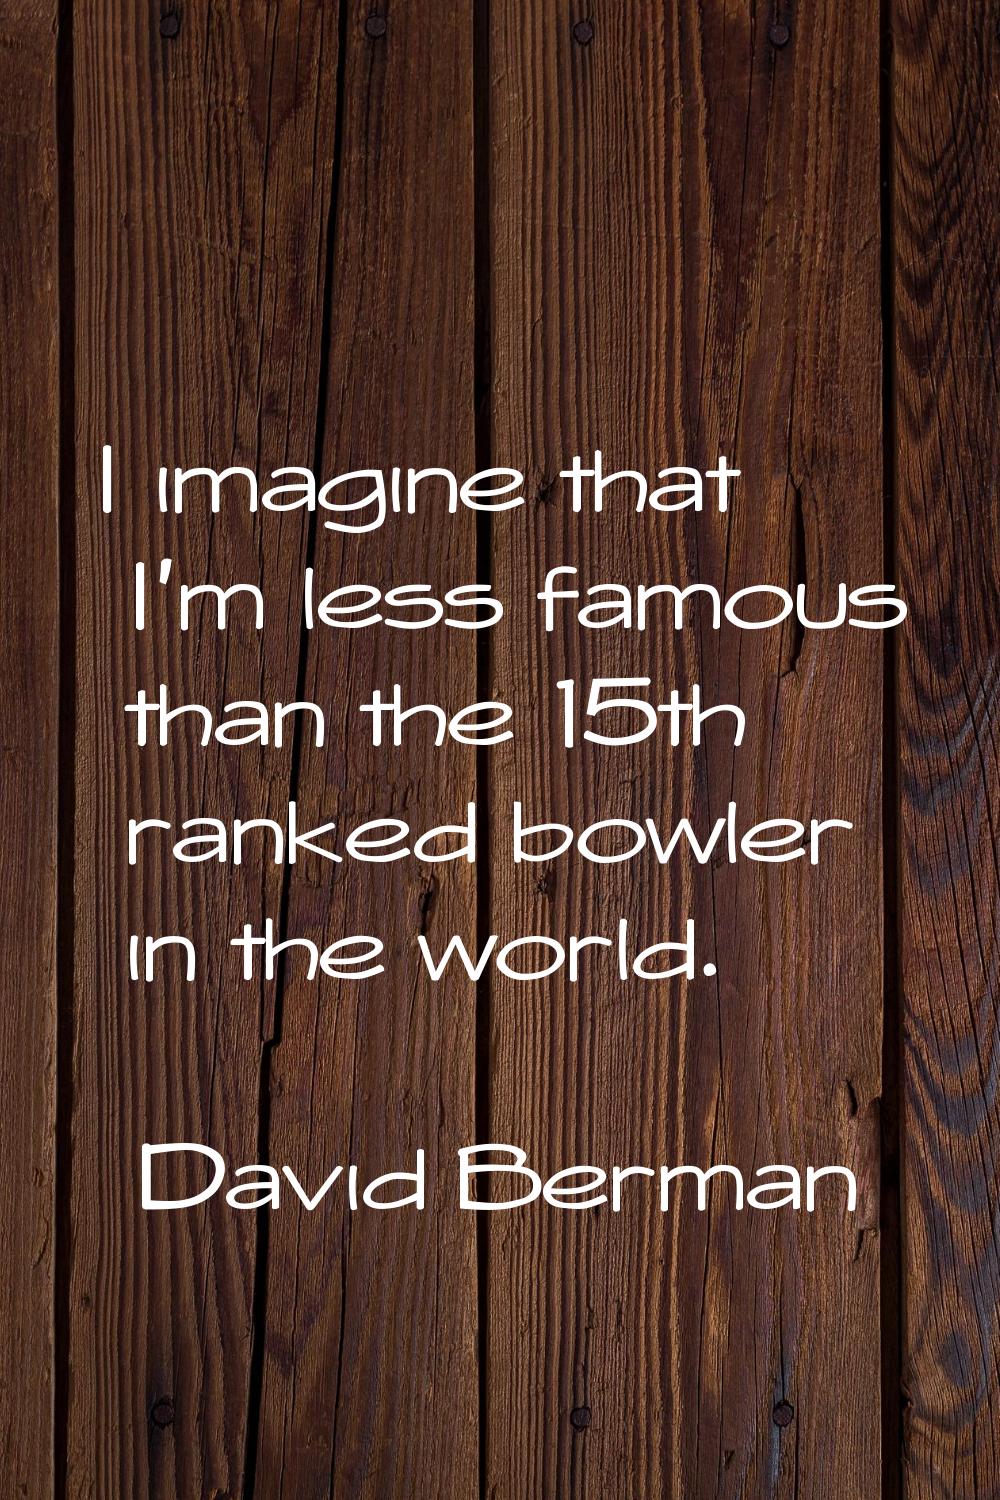 I imagine that I'm less famous than the 15th ranked bowler in the world.